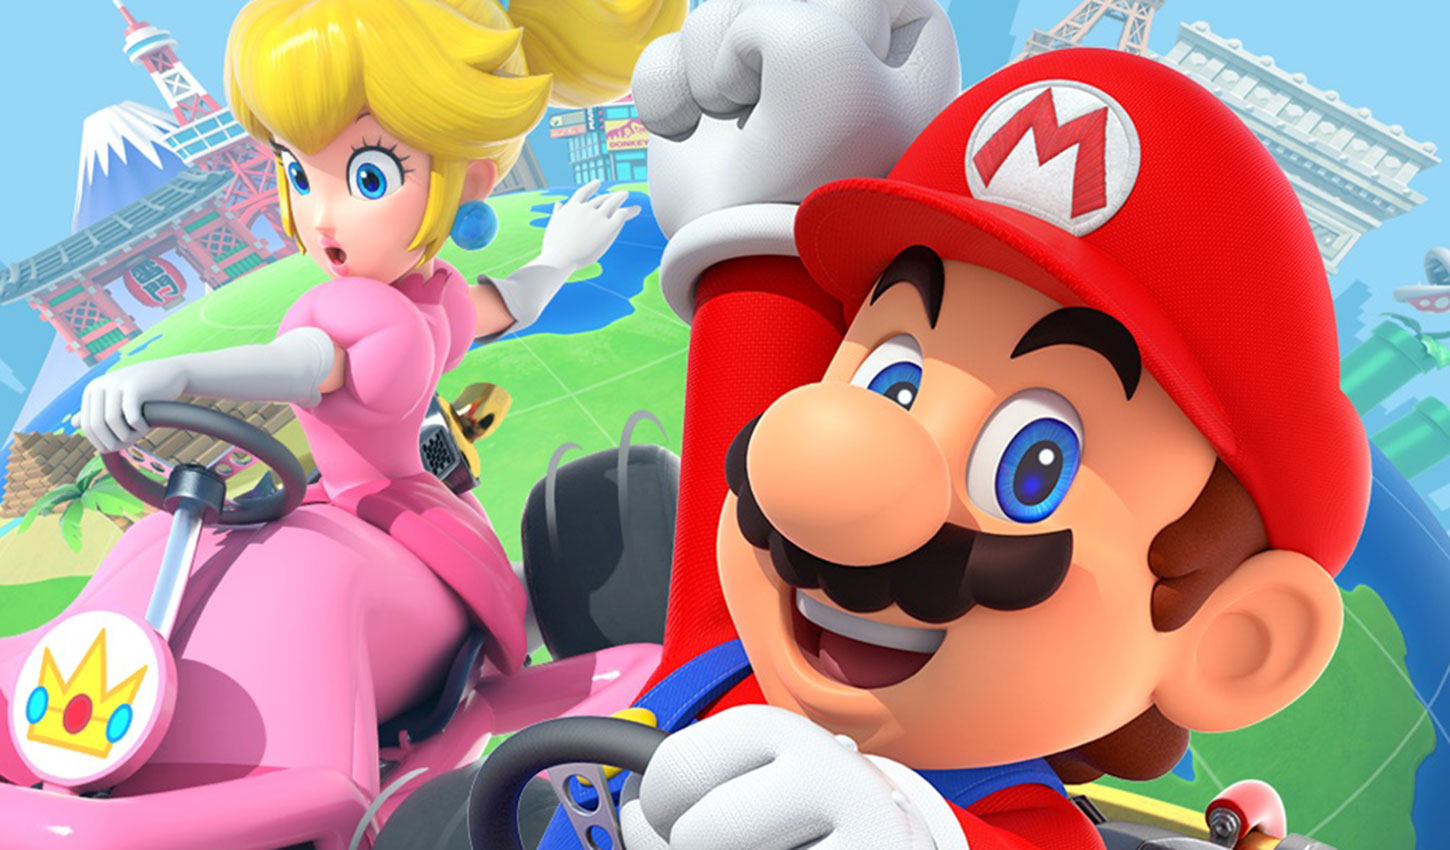 Mario Kart Races to 90 Million Downloads in First Week to Become Nintendo's Fastest-Ever Mobile Game Launch